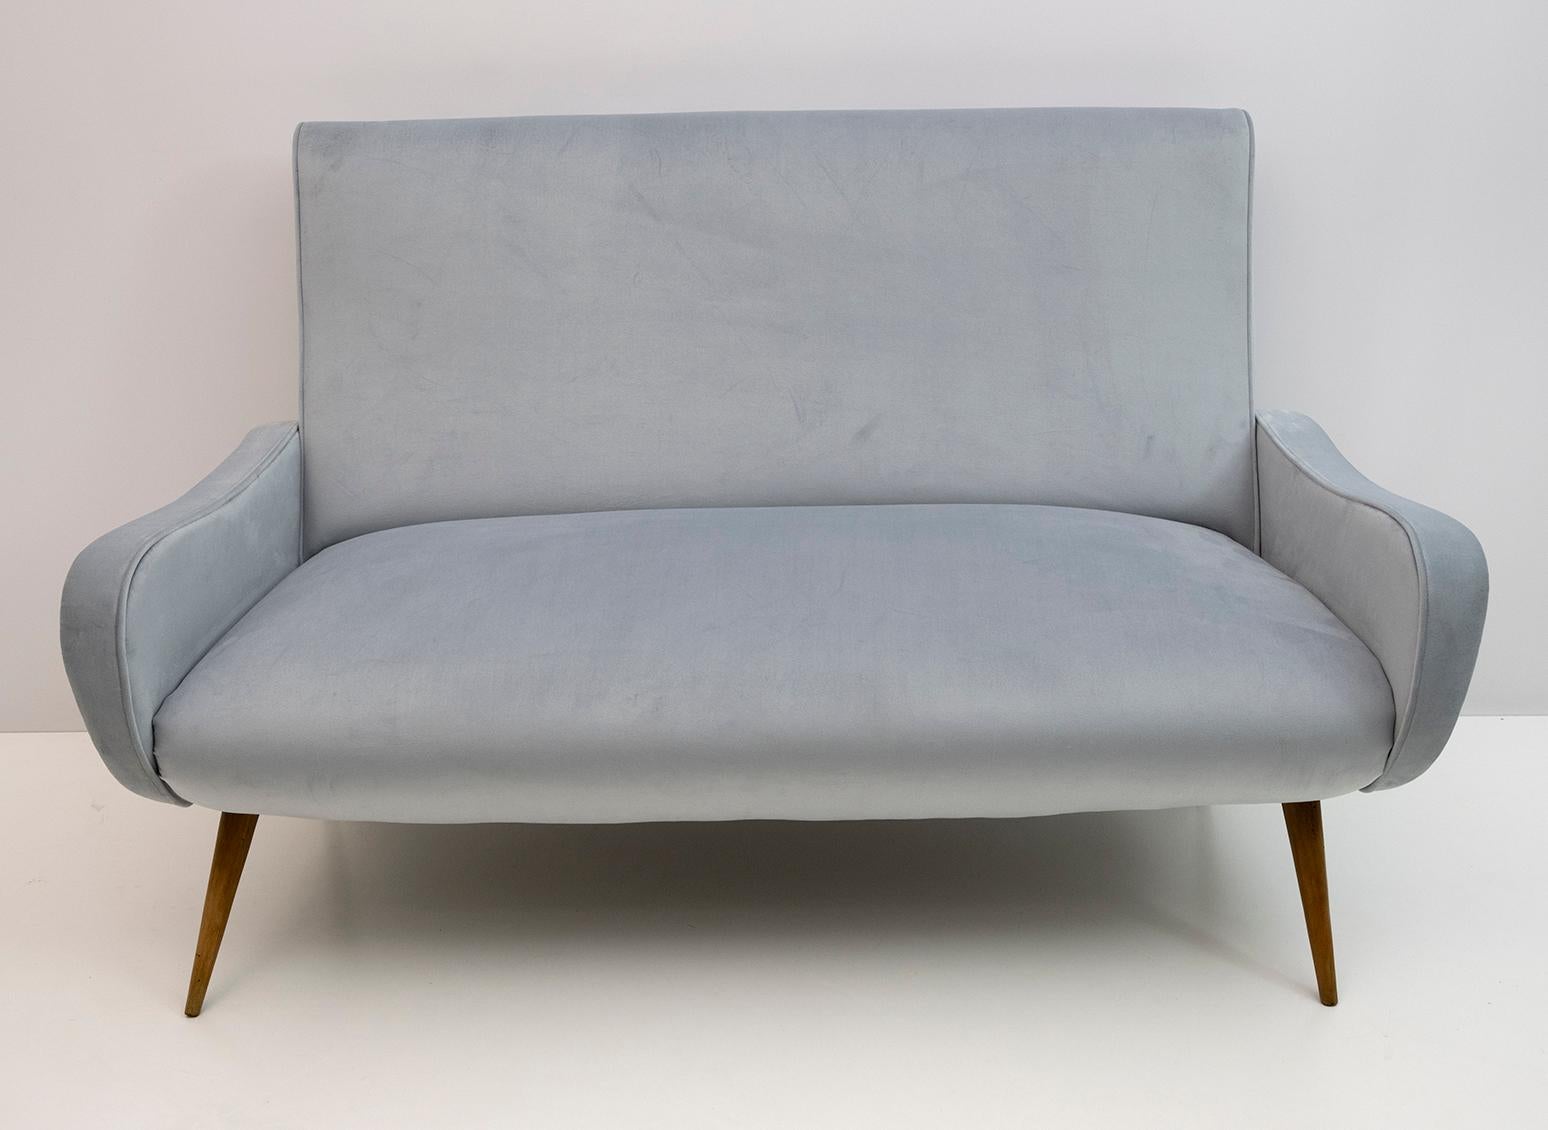 Lady Marco Zanuso style sofa. The sofa has been restored and upholstered in blue velvet, the feet are in beech wood.

The two armchairs are also available

Immediately after the war, Marco Zanuso began a fruitful collaboration with Arflex which